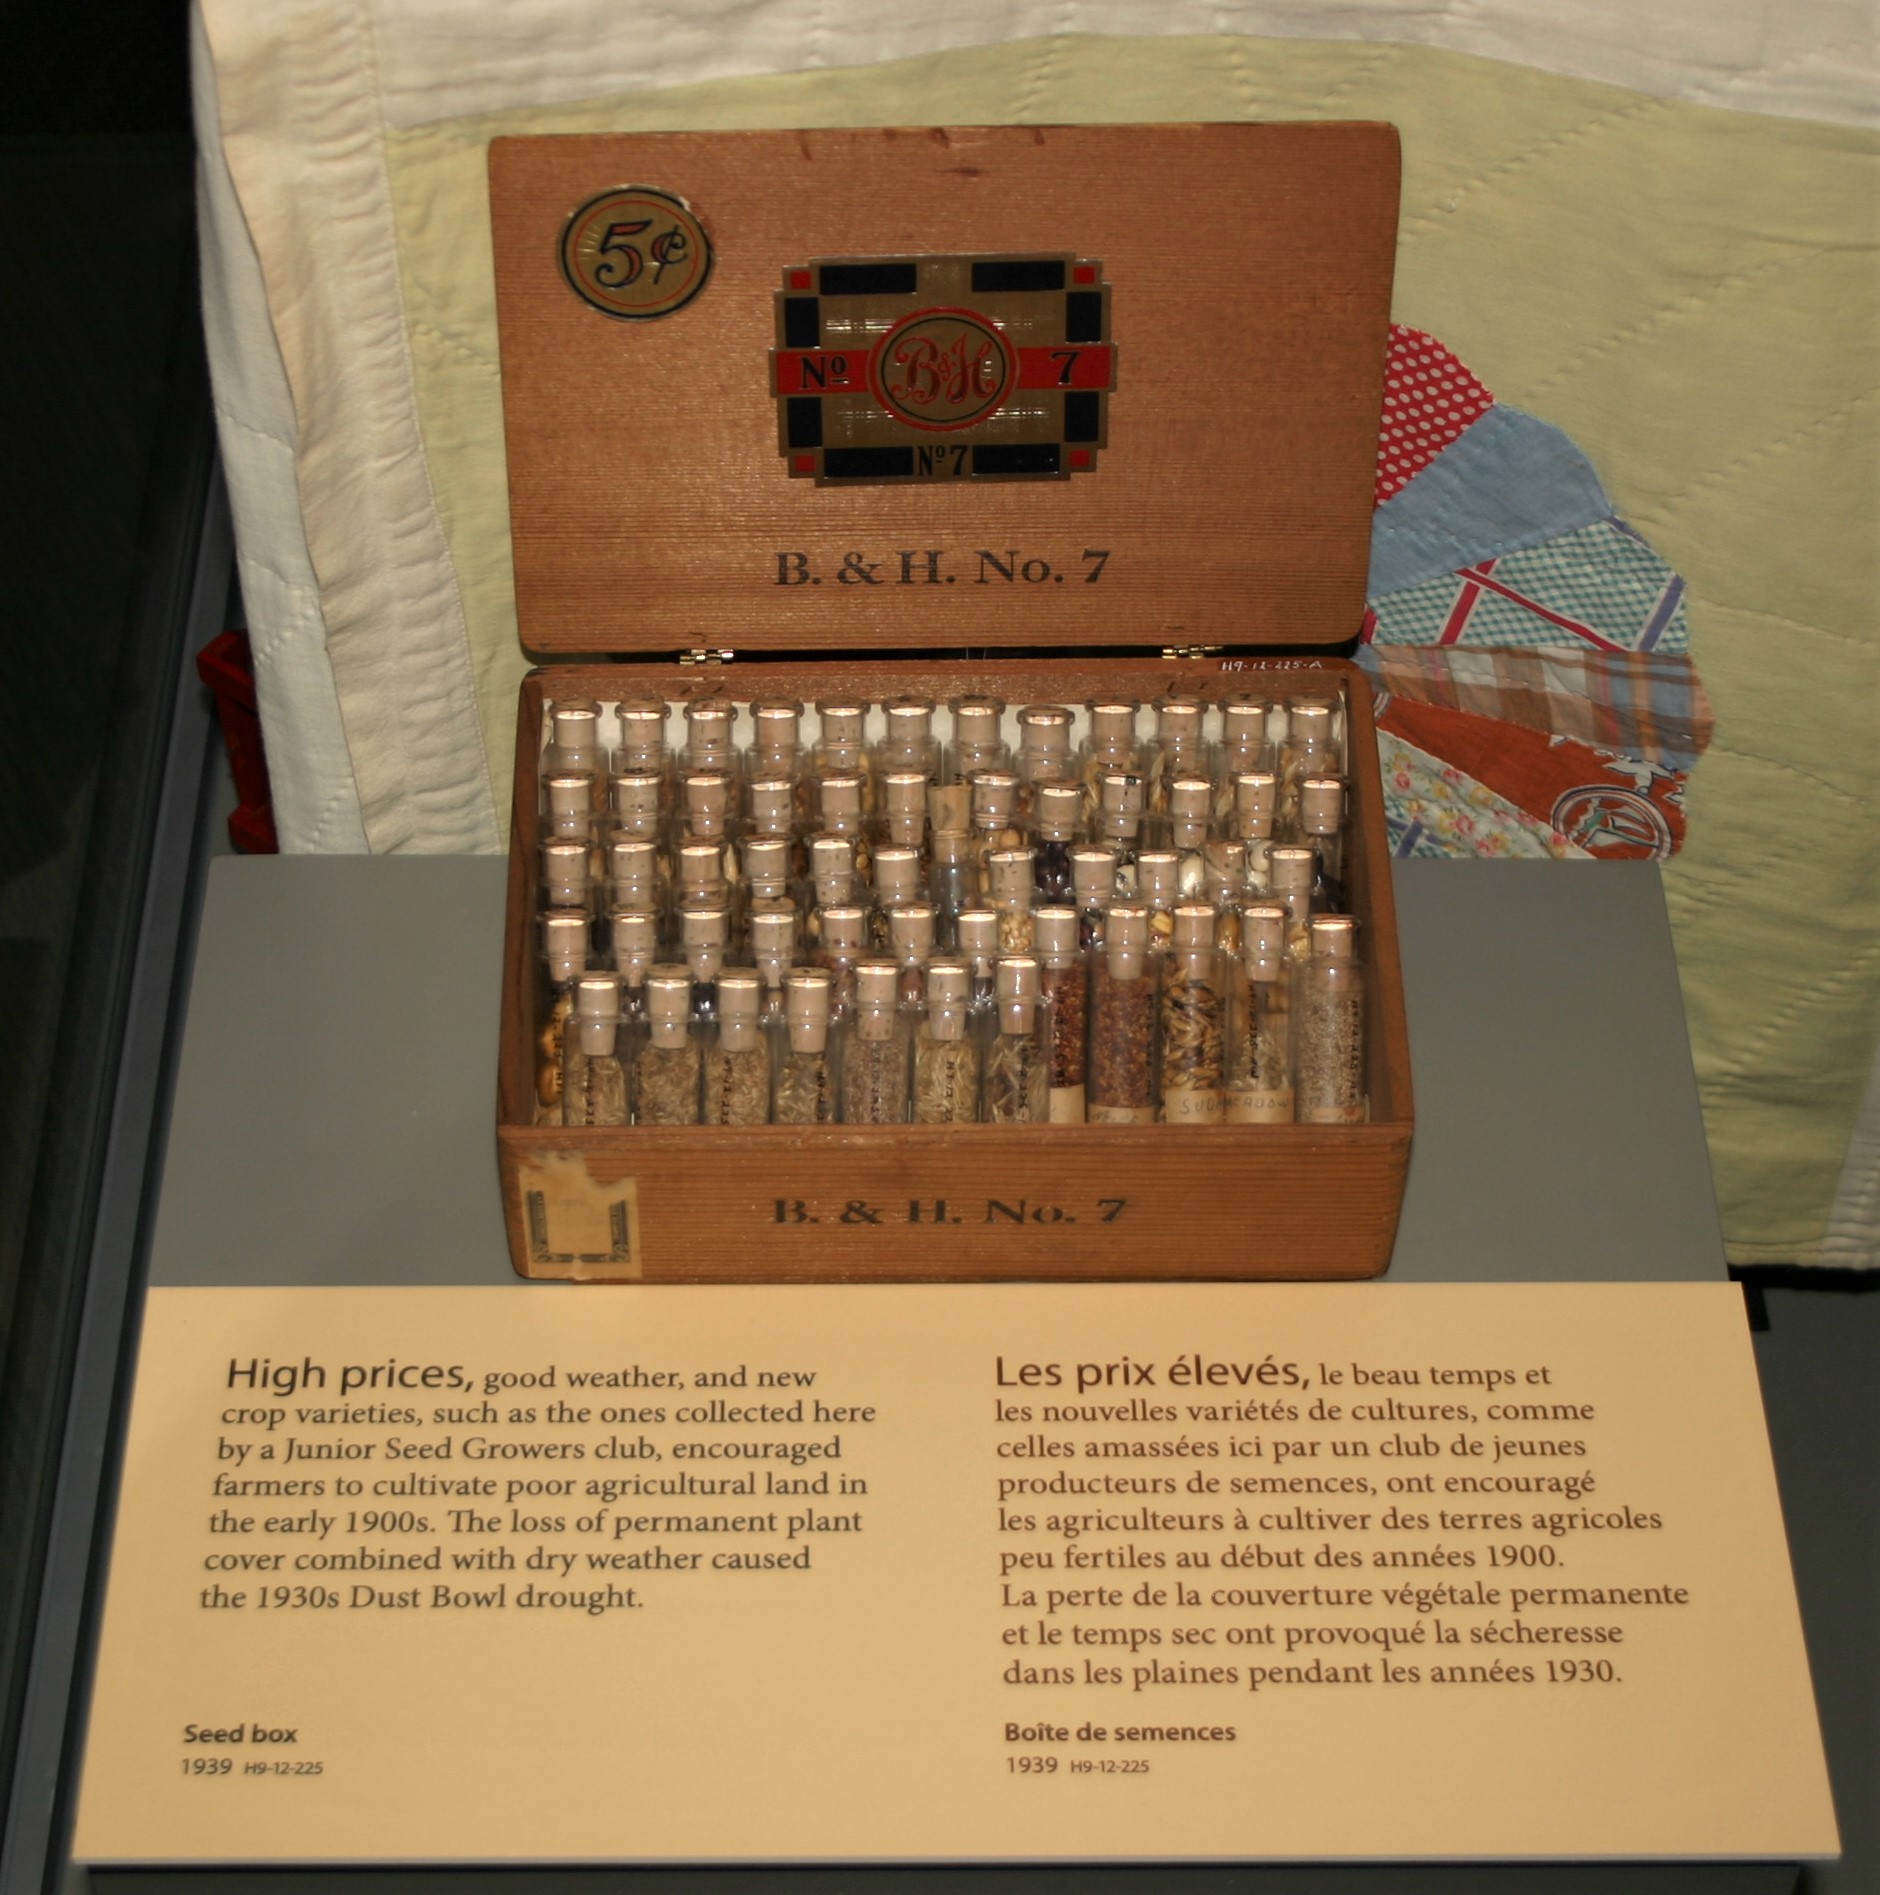 A small wooden chest containing rows of vials filled with seeds.